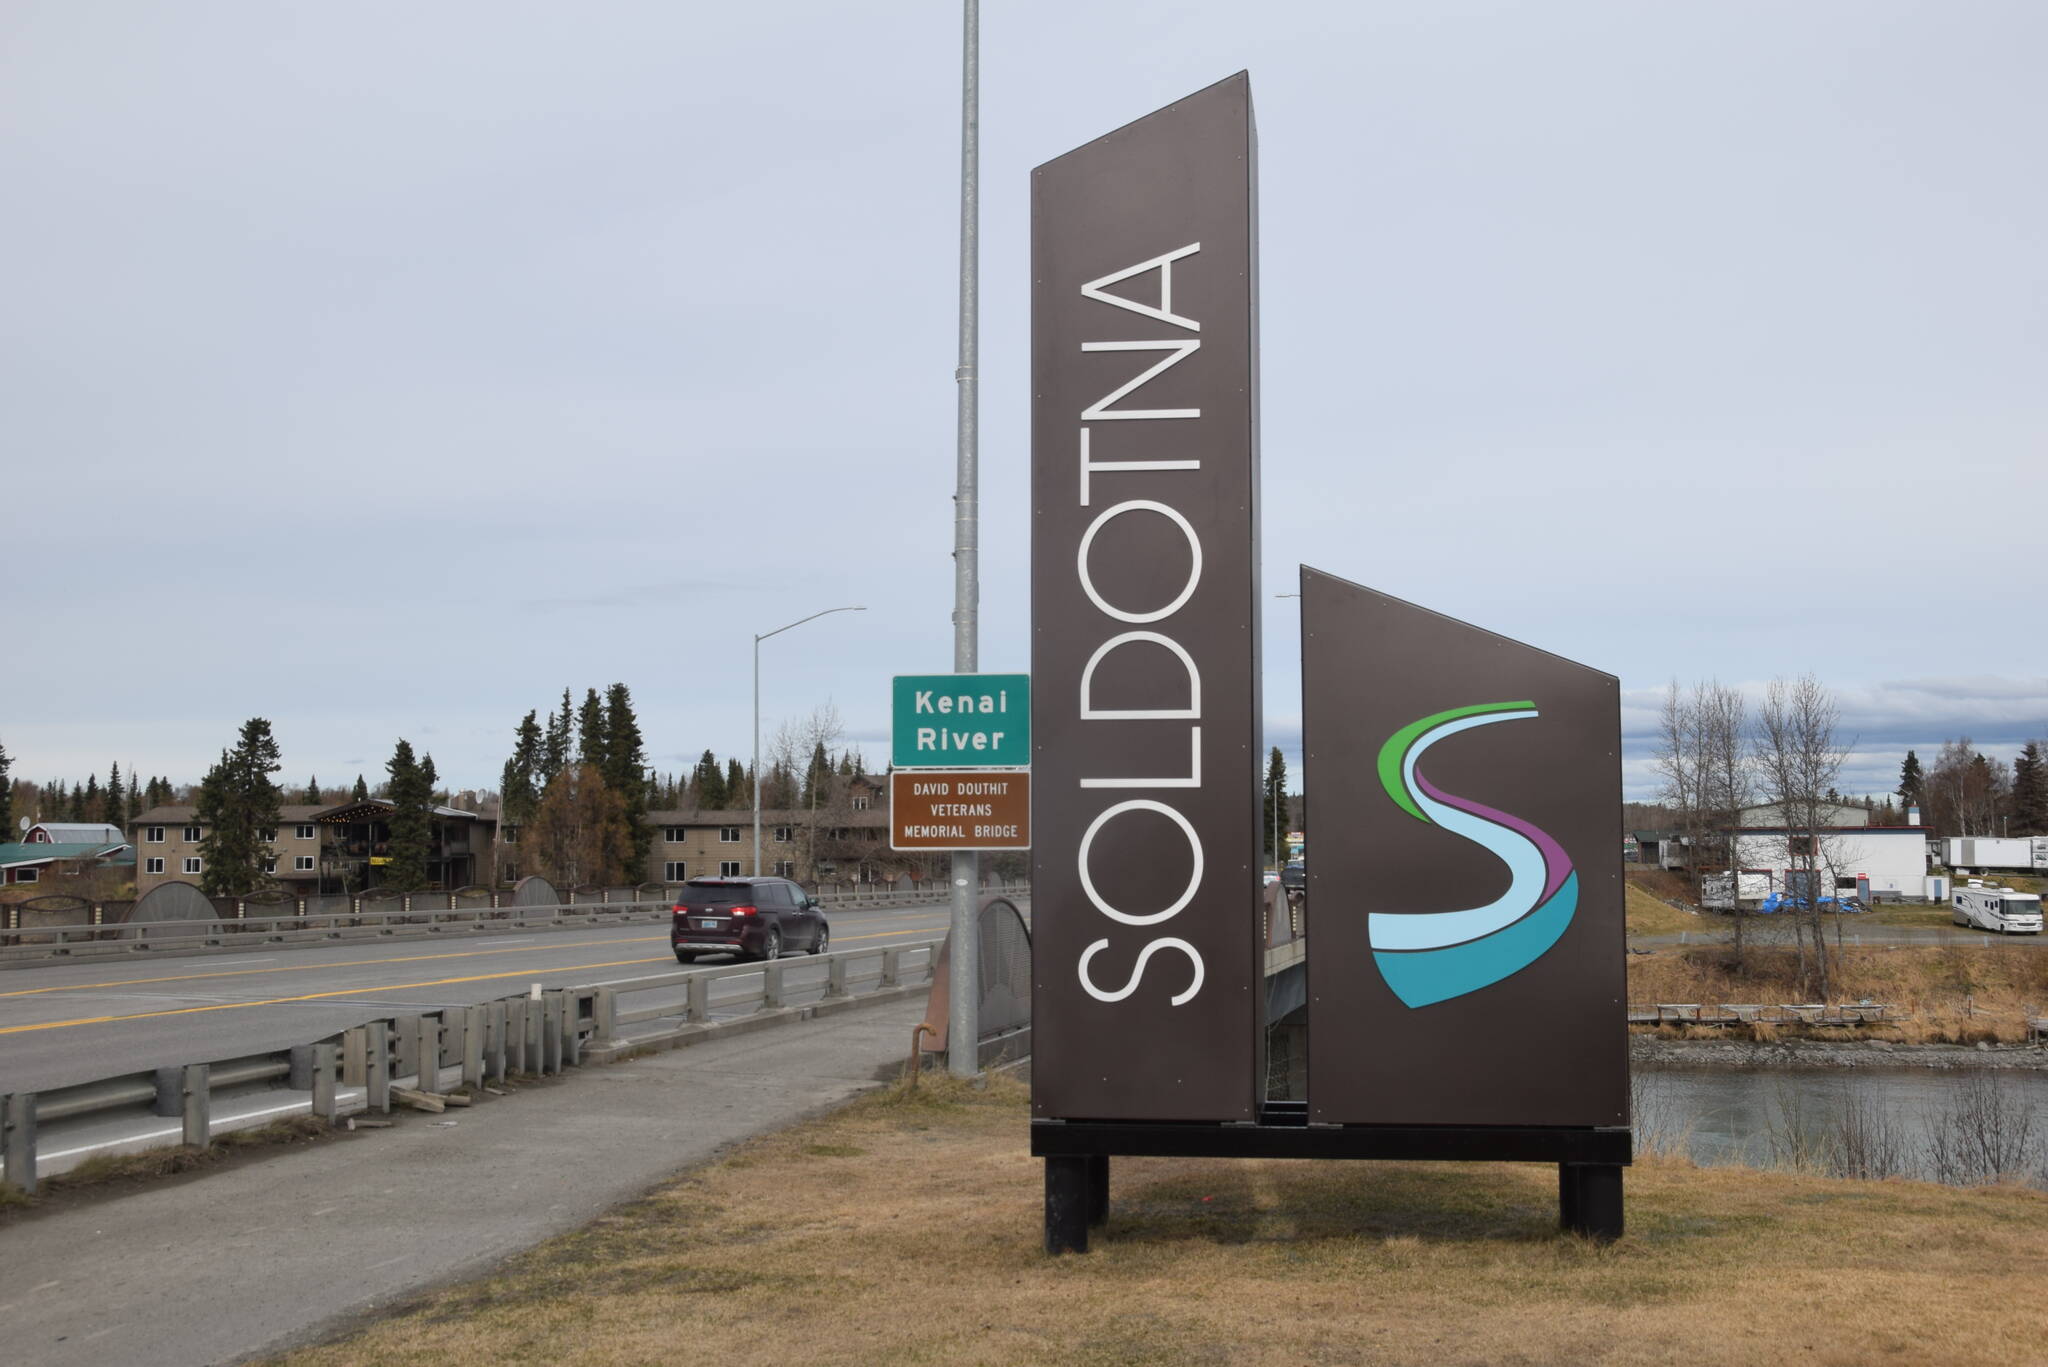 A new sign welcoming people to the City of Soldotna stands near the intersection of the Sterling Highway and Kenai River on May 1, 2019, in Soldotna, Alaska. (Photo by Brian Mazurek/Peninsula Clarion)